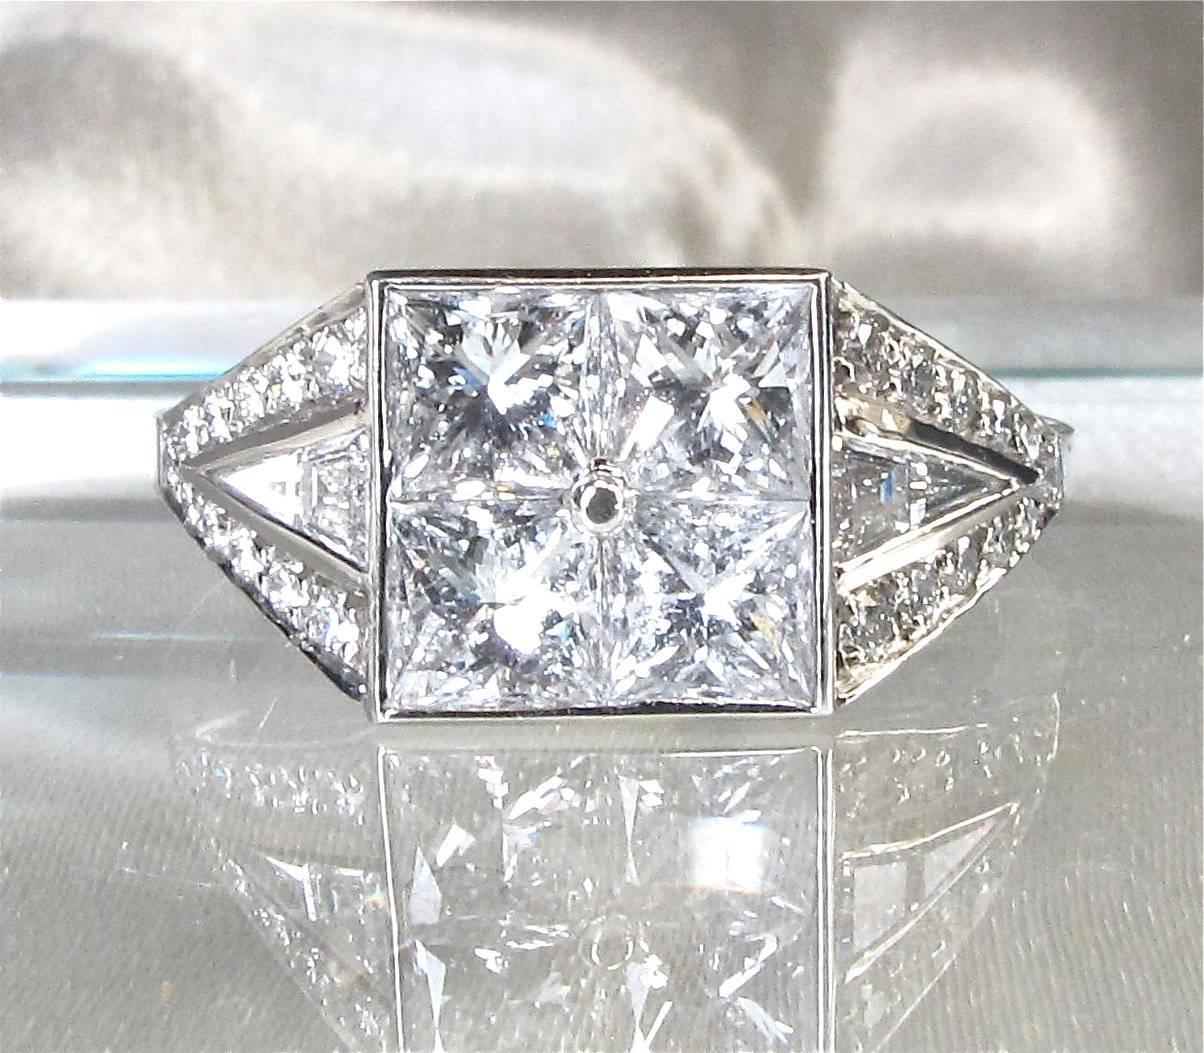 Diamond Ring in Art Deco Style
4 princess cut diamonds 1.65 cts
round diamonds 0.19 cts
fancy diamonds 0.17 ct
mounted in platinum
ring size 54 (size can be adjusted 2 sizes down or up free of charge)